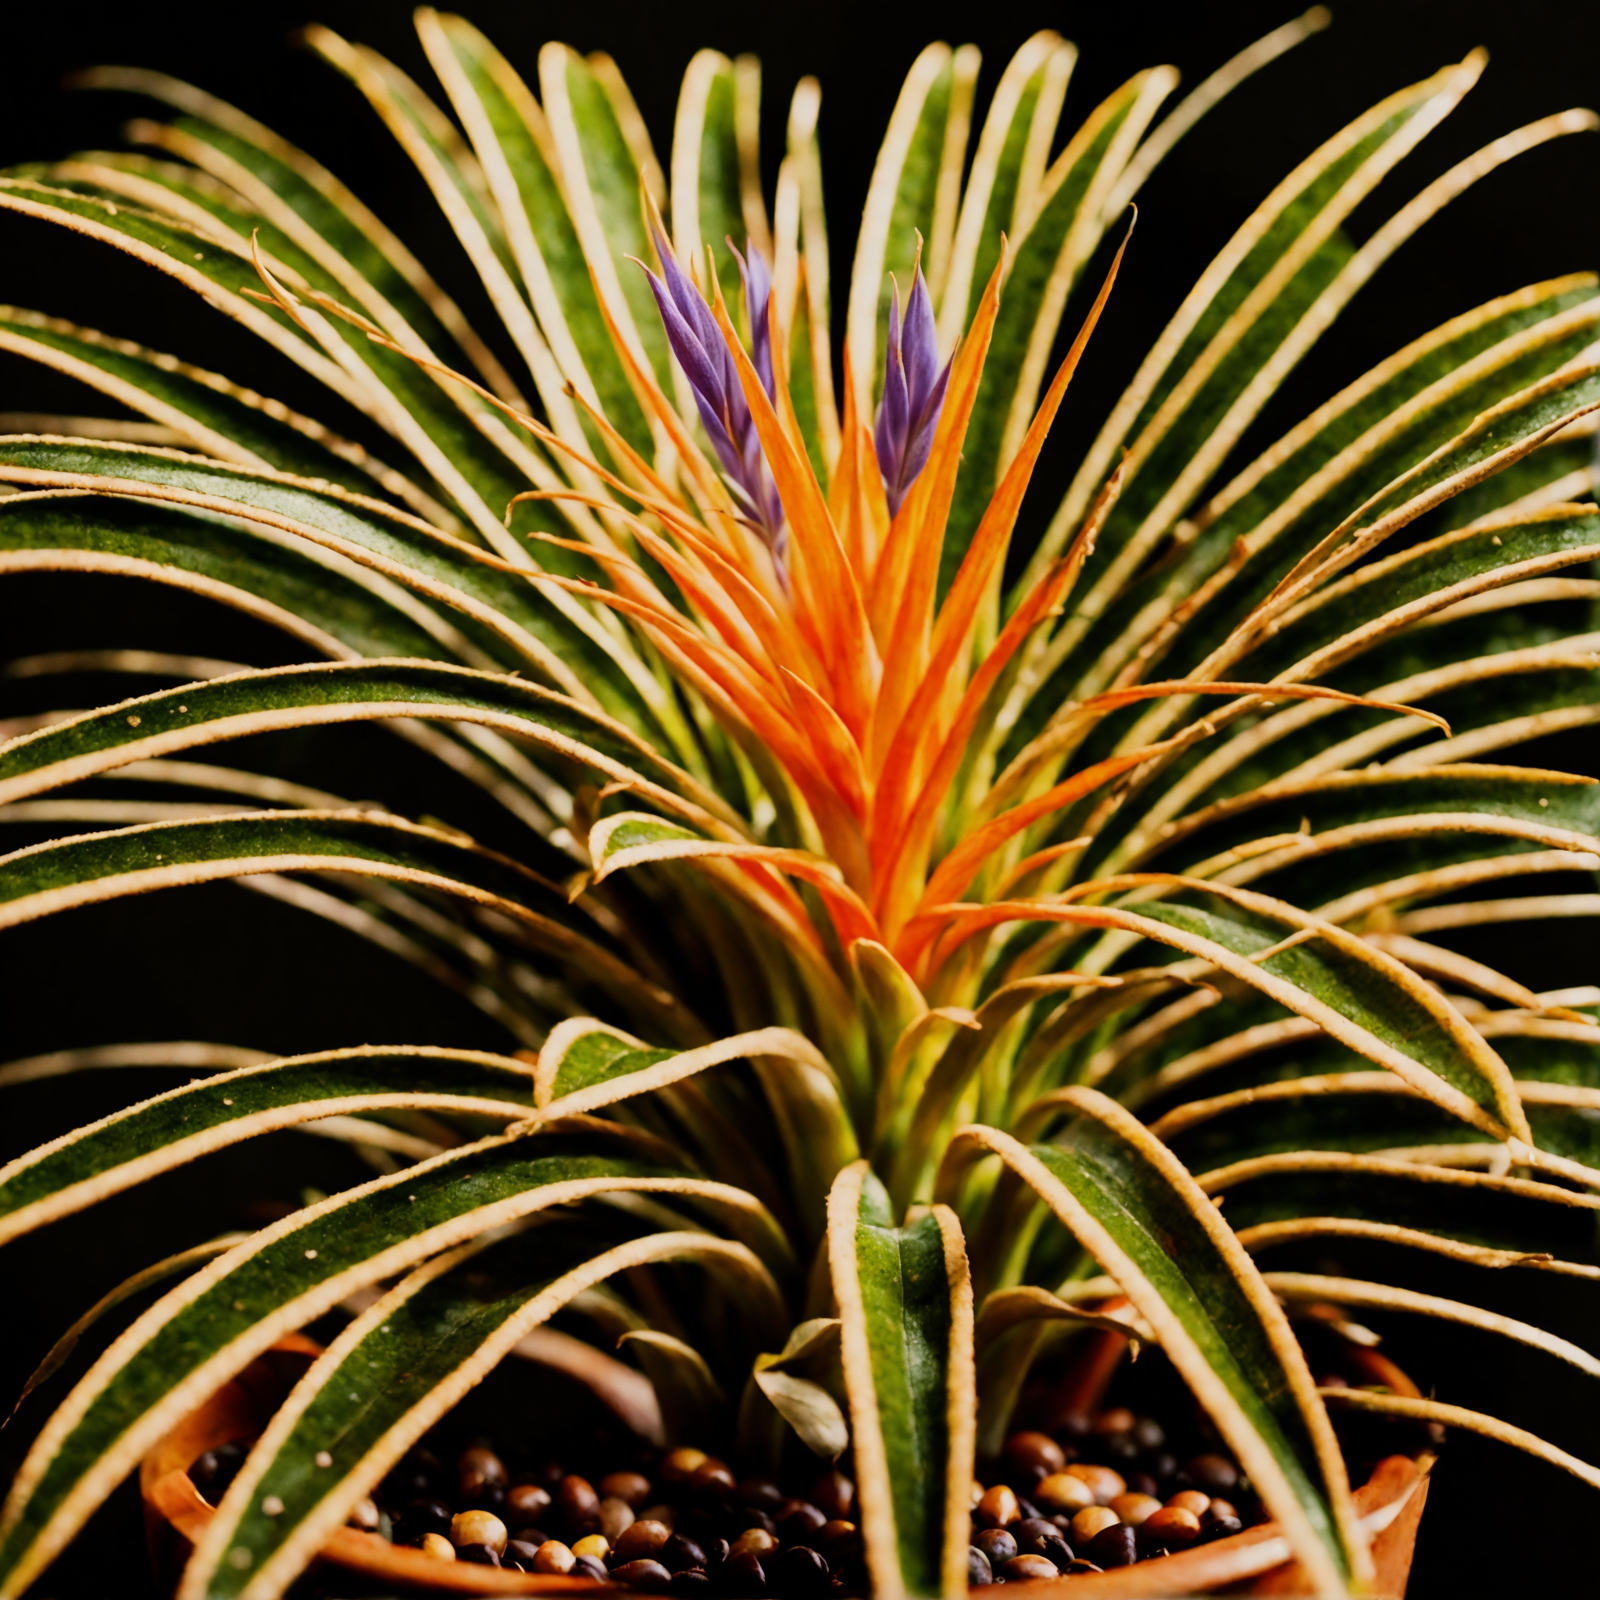 Tillandsia ionantha cluster with purple hues, clear lit against a dark backdrop, indoor setting.